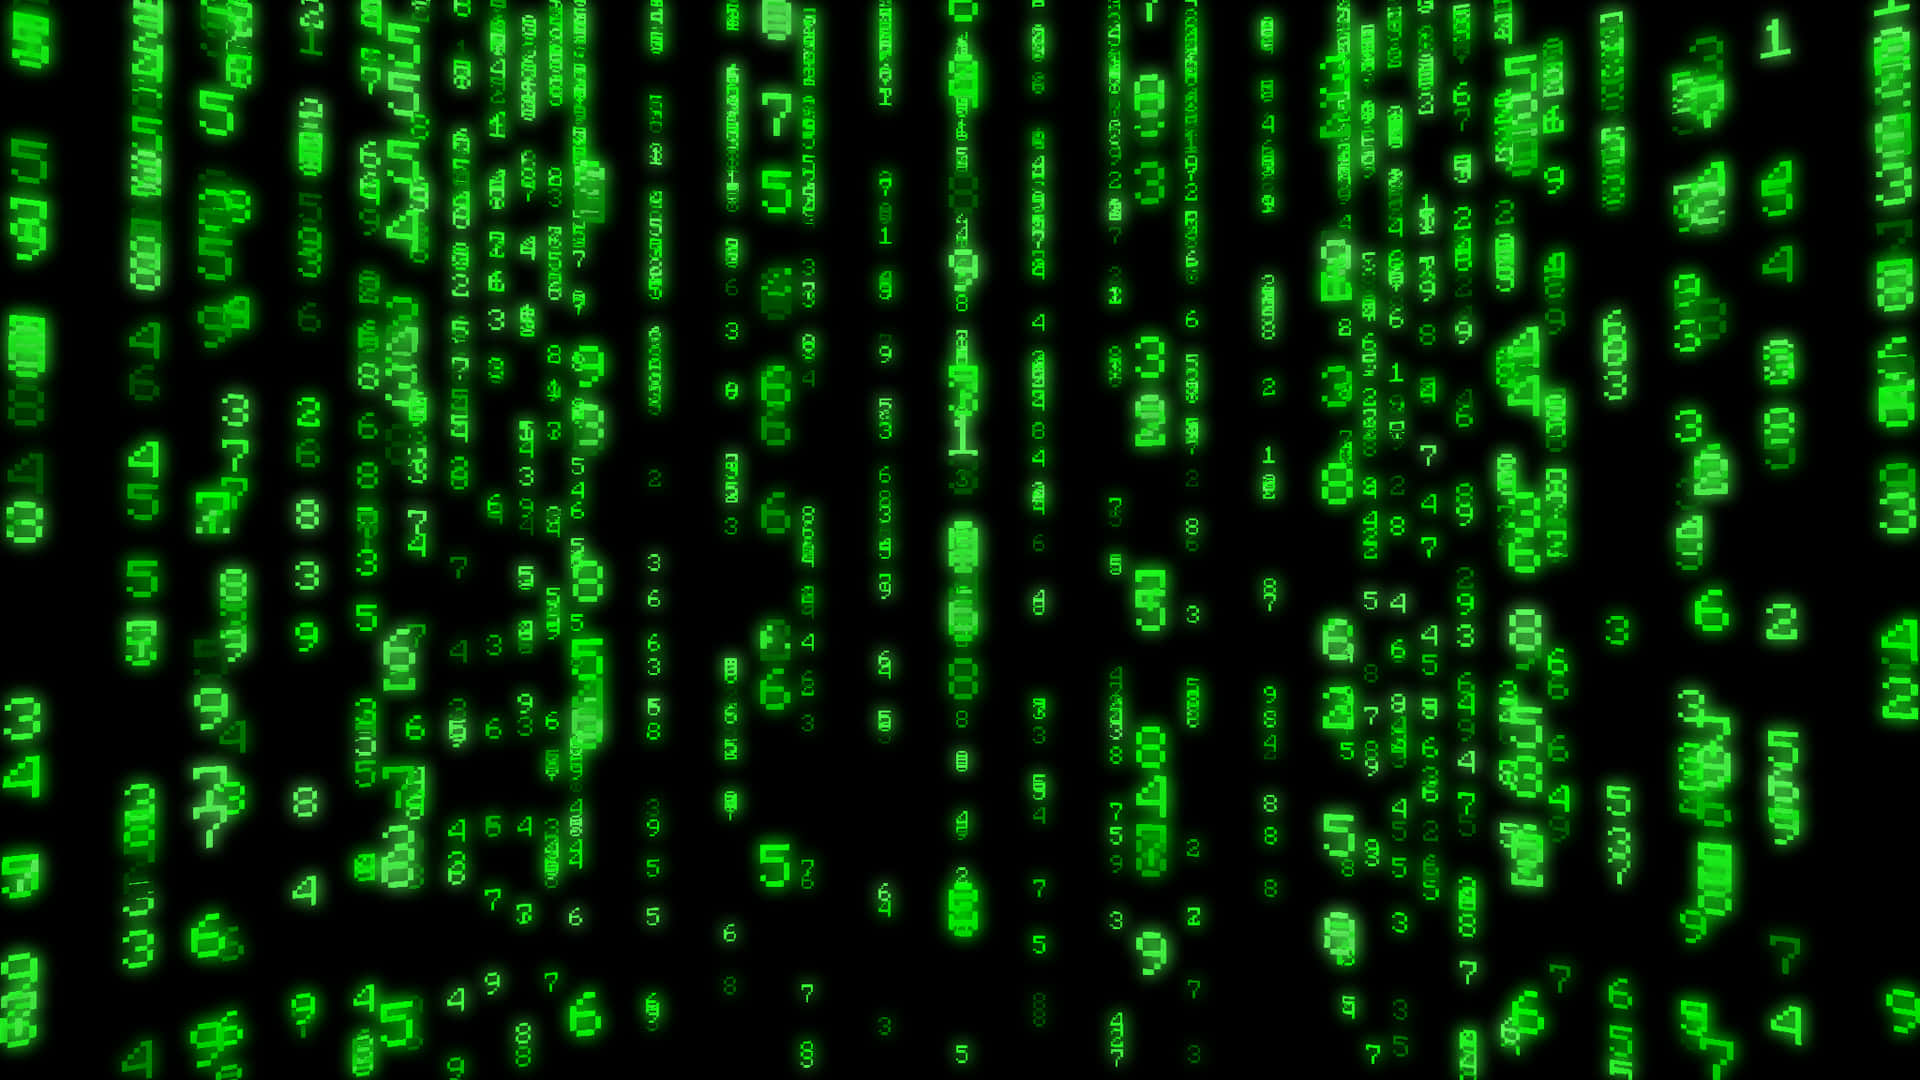 "Welcome to the mystical world of the Matrix Code" Wallpaper